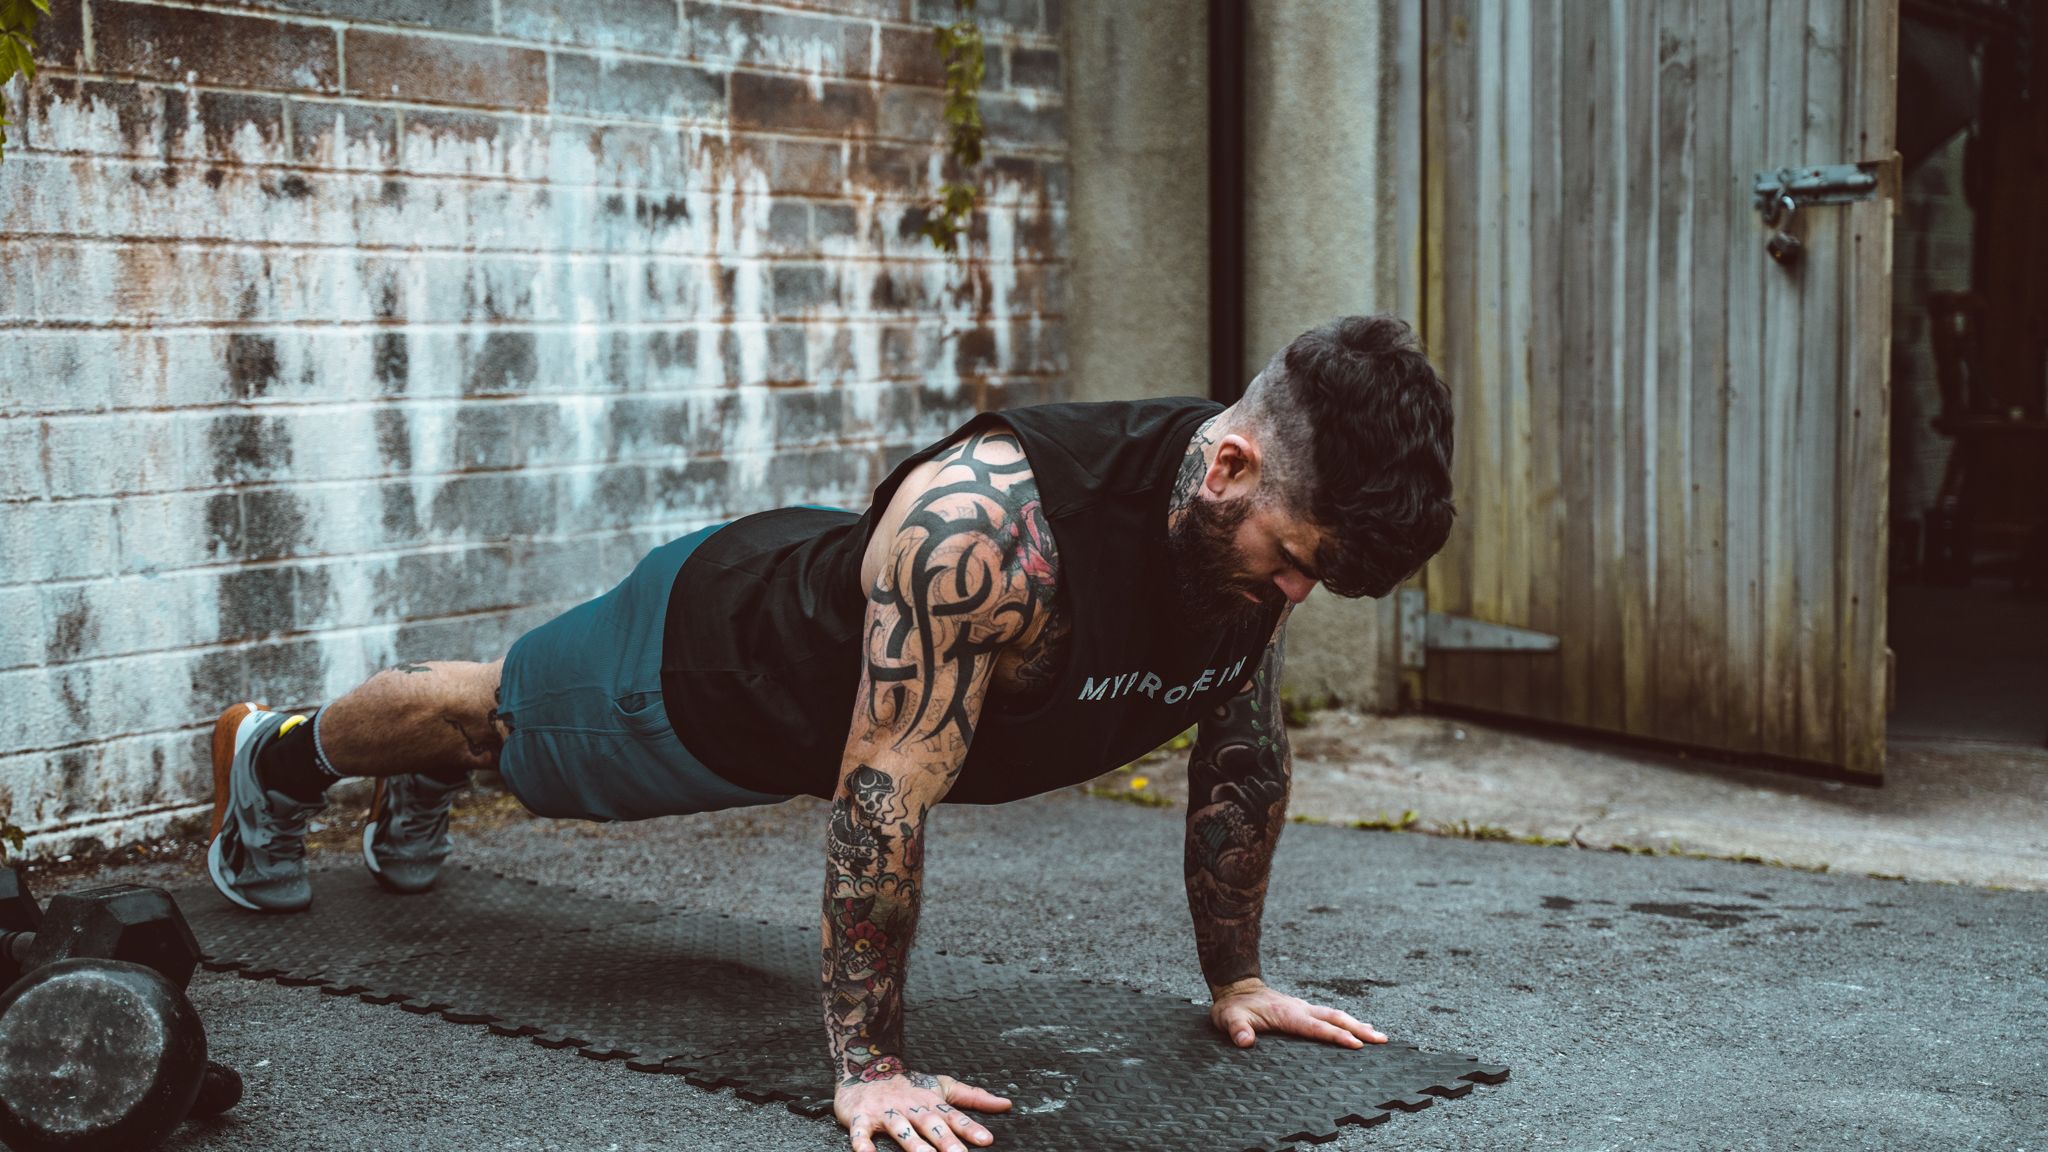 21 CrossFit Workouts to Build Muscle, Strength and Burn Fat